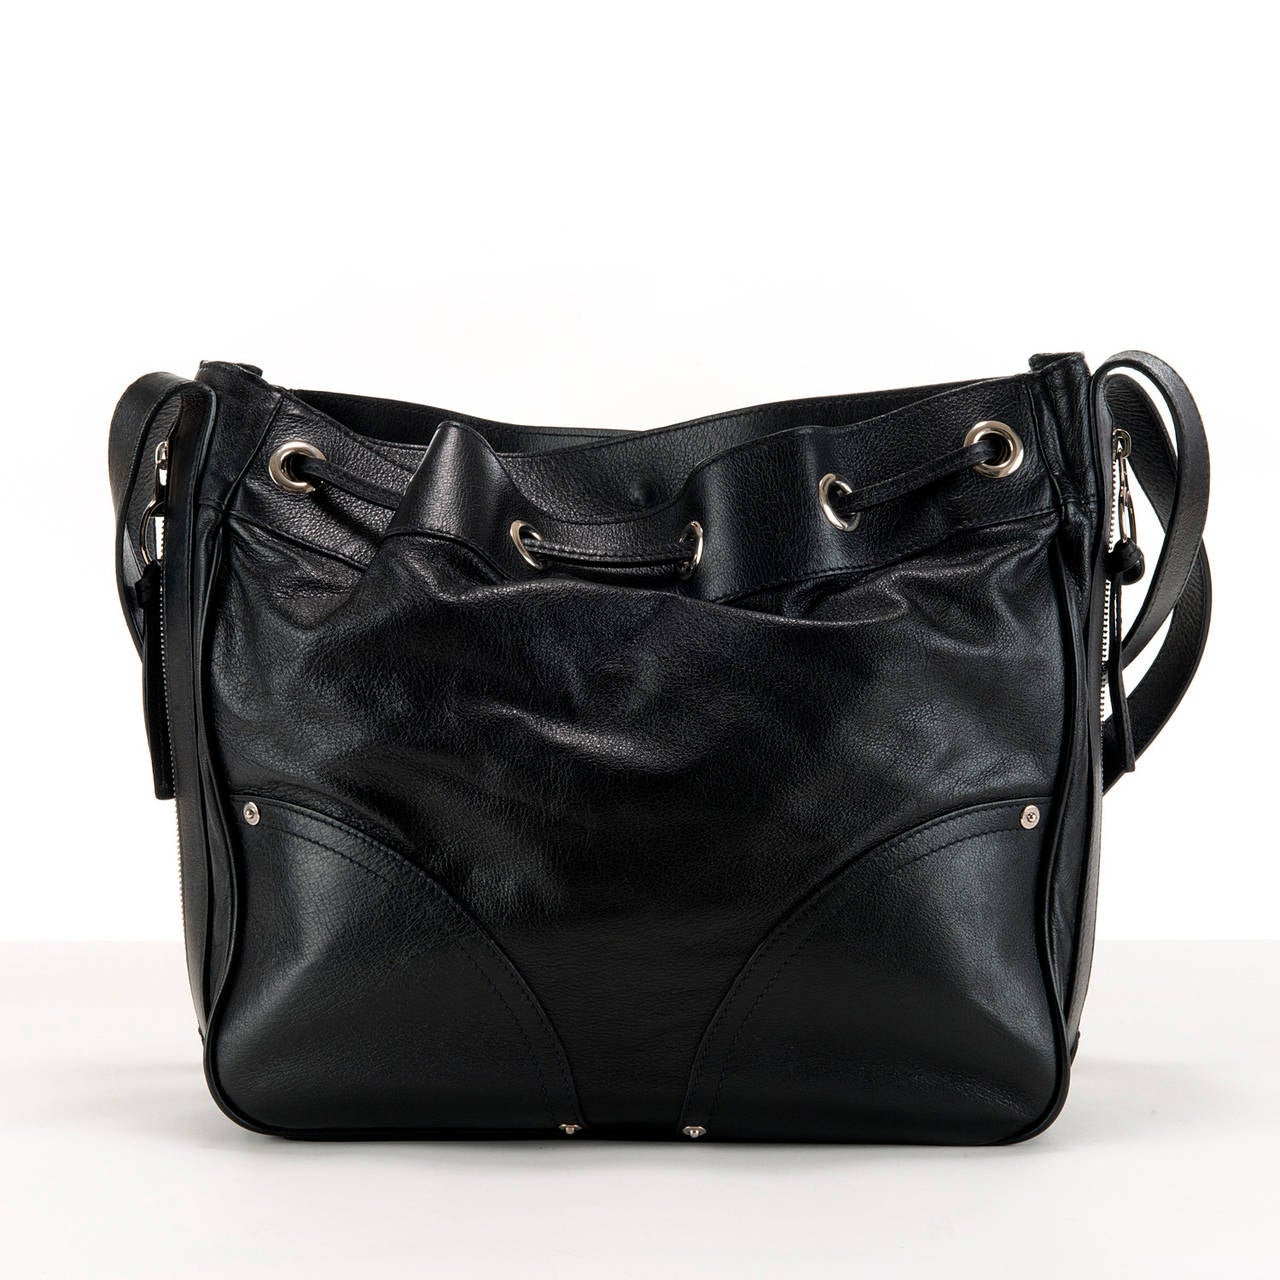 This fantastic Jet Black Mulberry Bag is a true utility piece. It will cope easily as your weekend travel bag or equally as a very smart shoulder or cross body bag. Made in super soft lambskin, hand-made by English craftsman and finished with silver